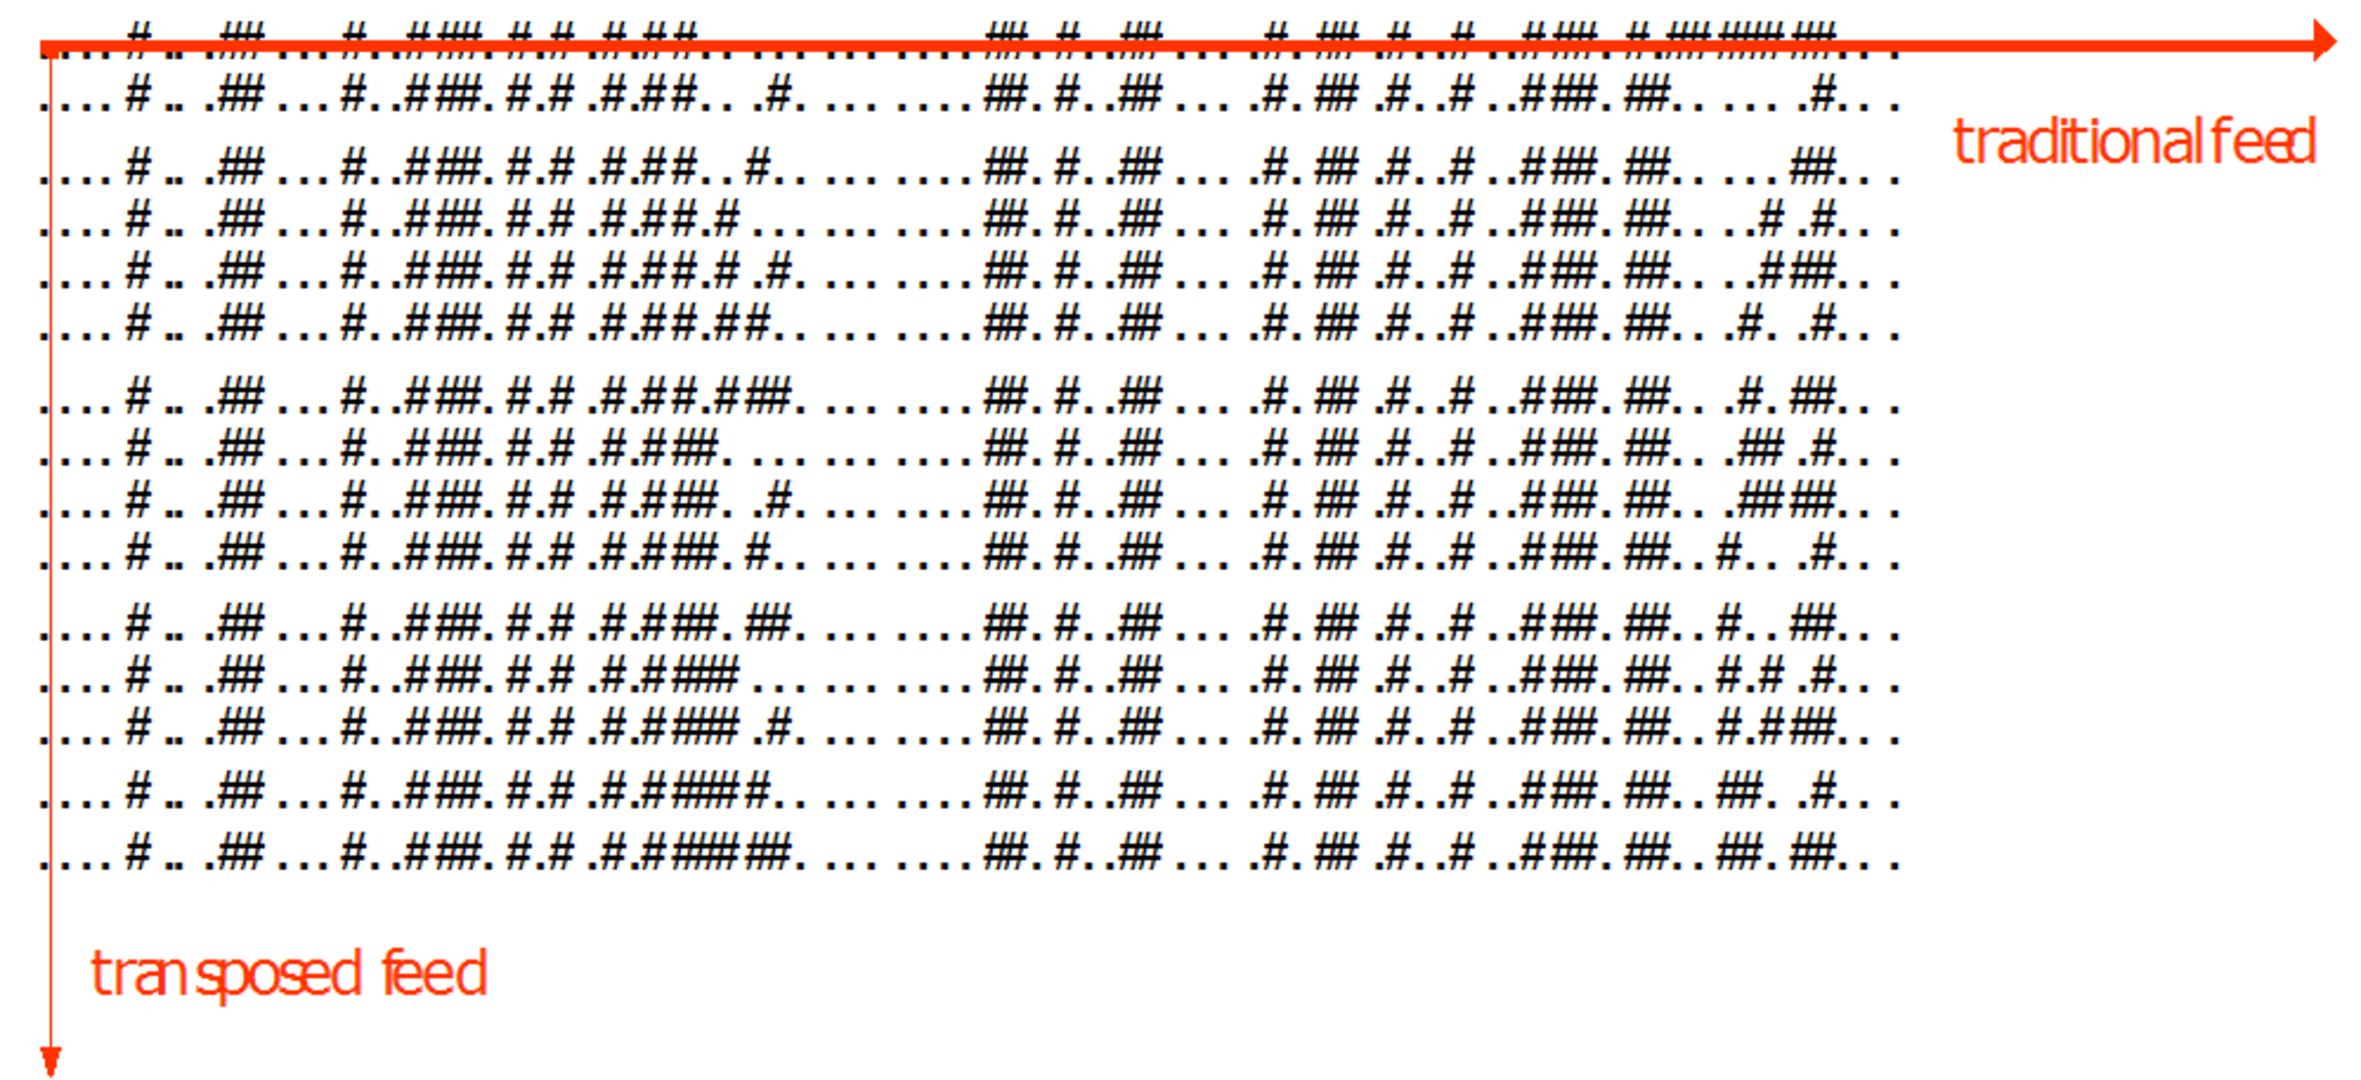 Packet Compression groups packets of the same type and reads them using the binary transposed feed.